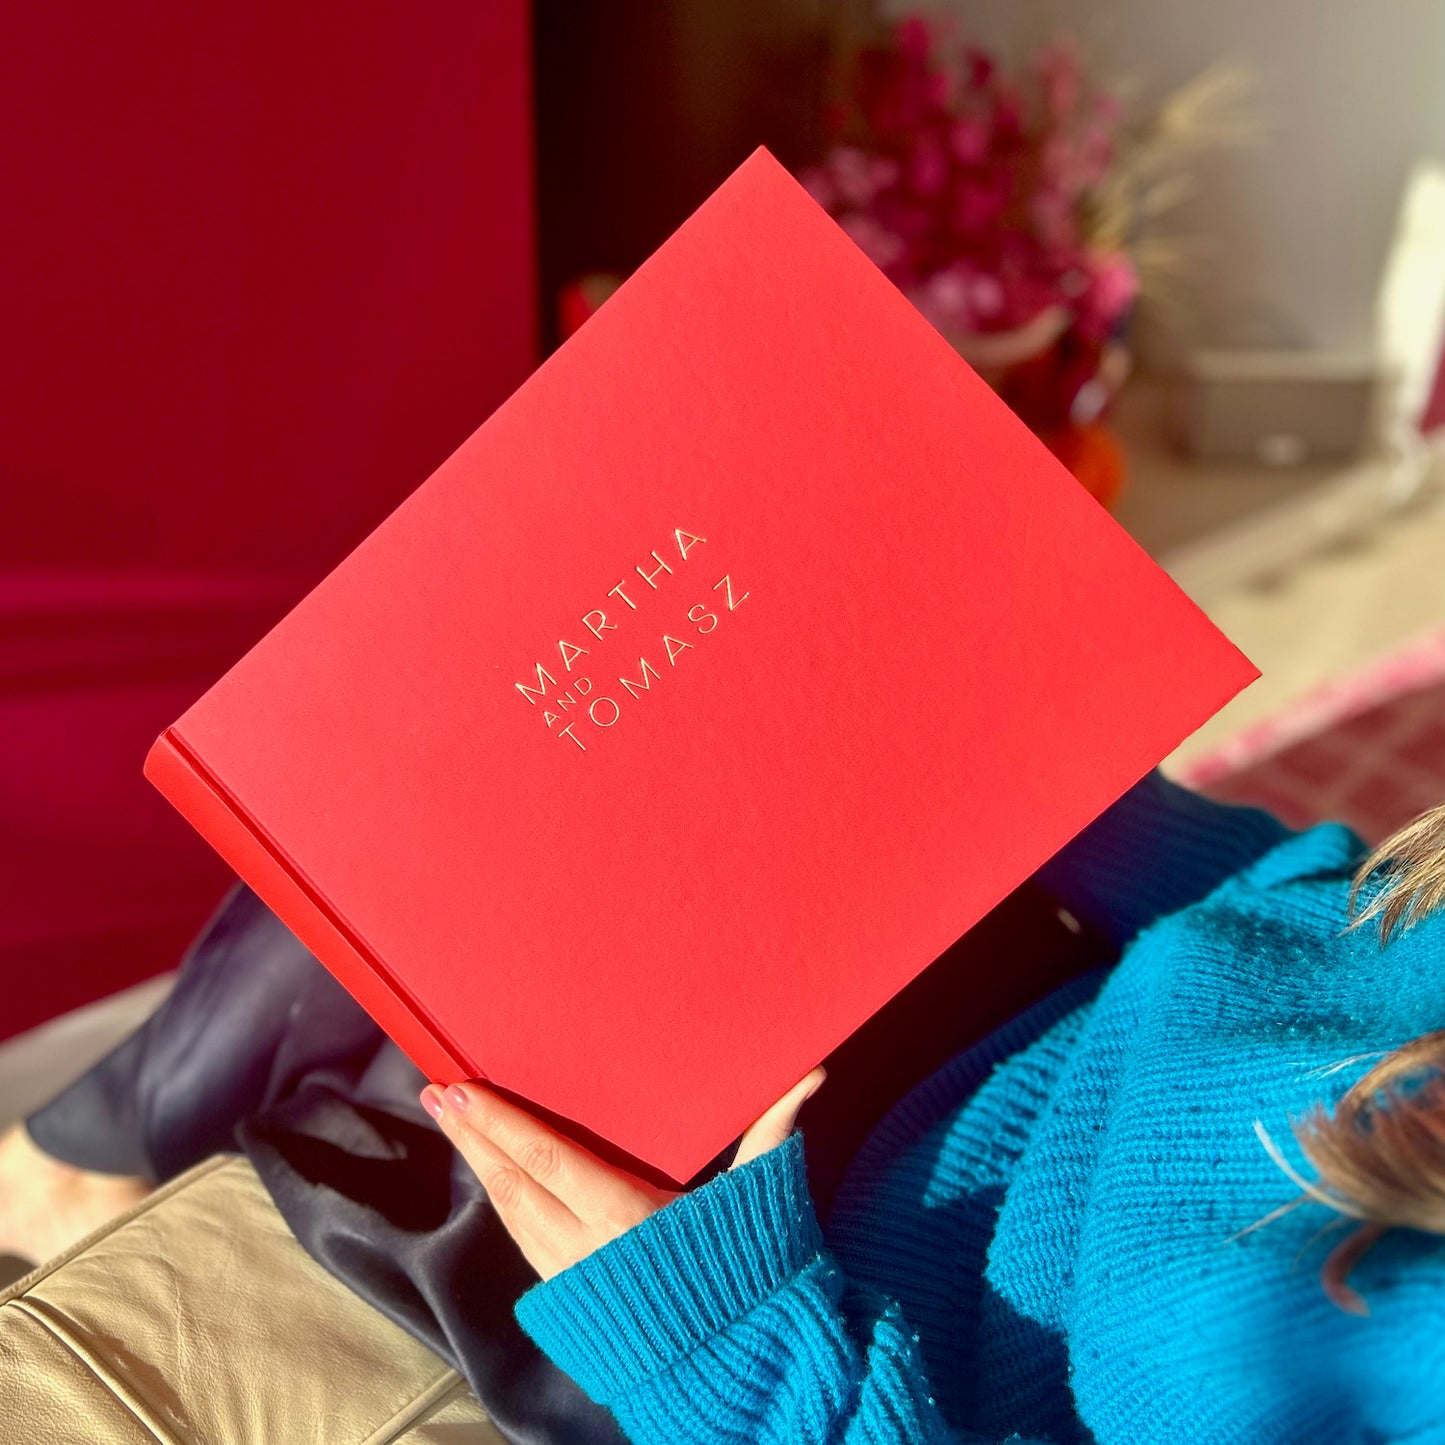 a woman is sitting on the sofa looking through a big red wedding guest book. It has gold writing on the front